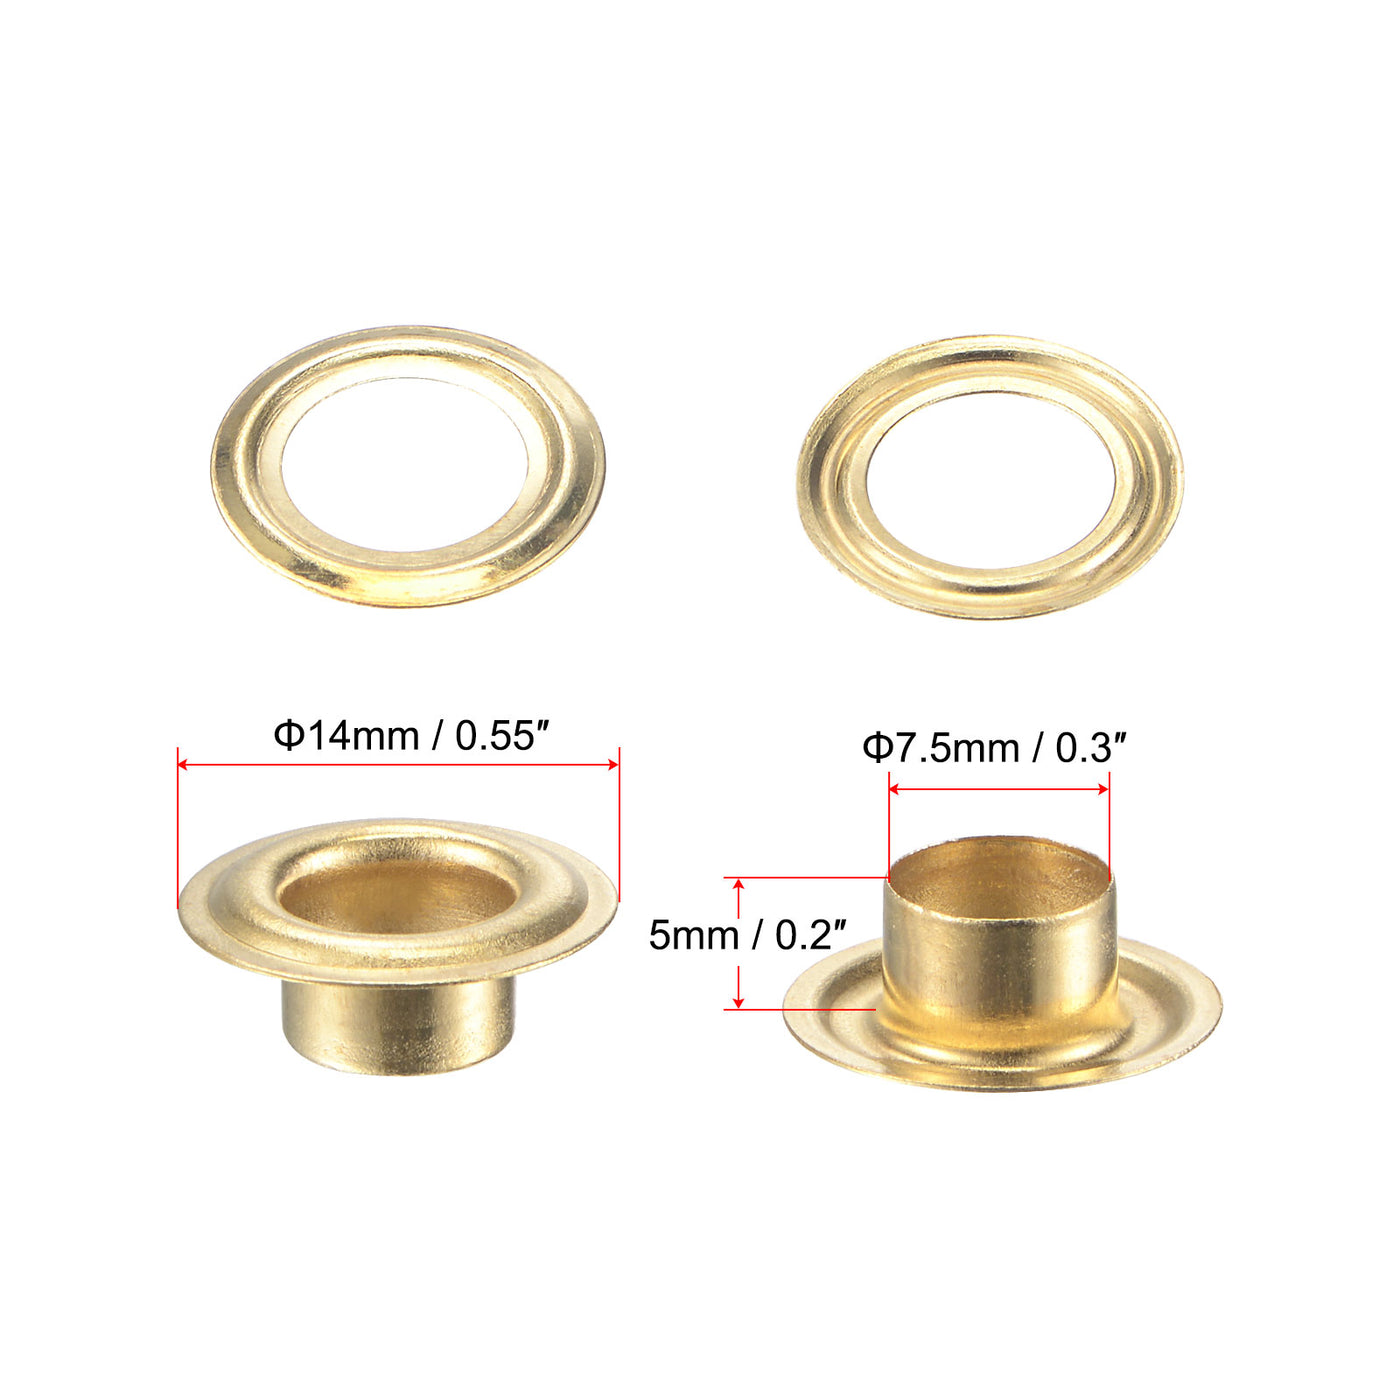 uxcell Uxcell 25Set 7.5mm Hole Copper Grommets Eyelets Gold Tone for Fabric Leather